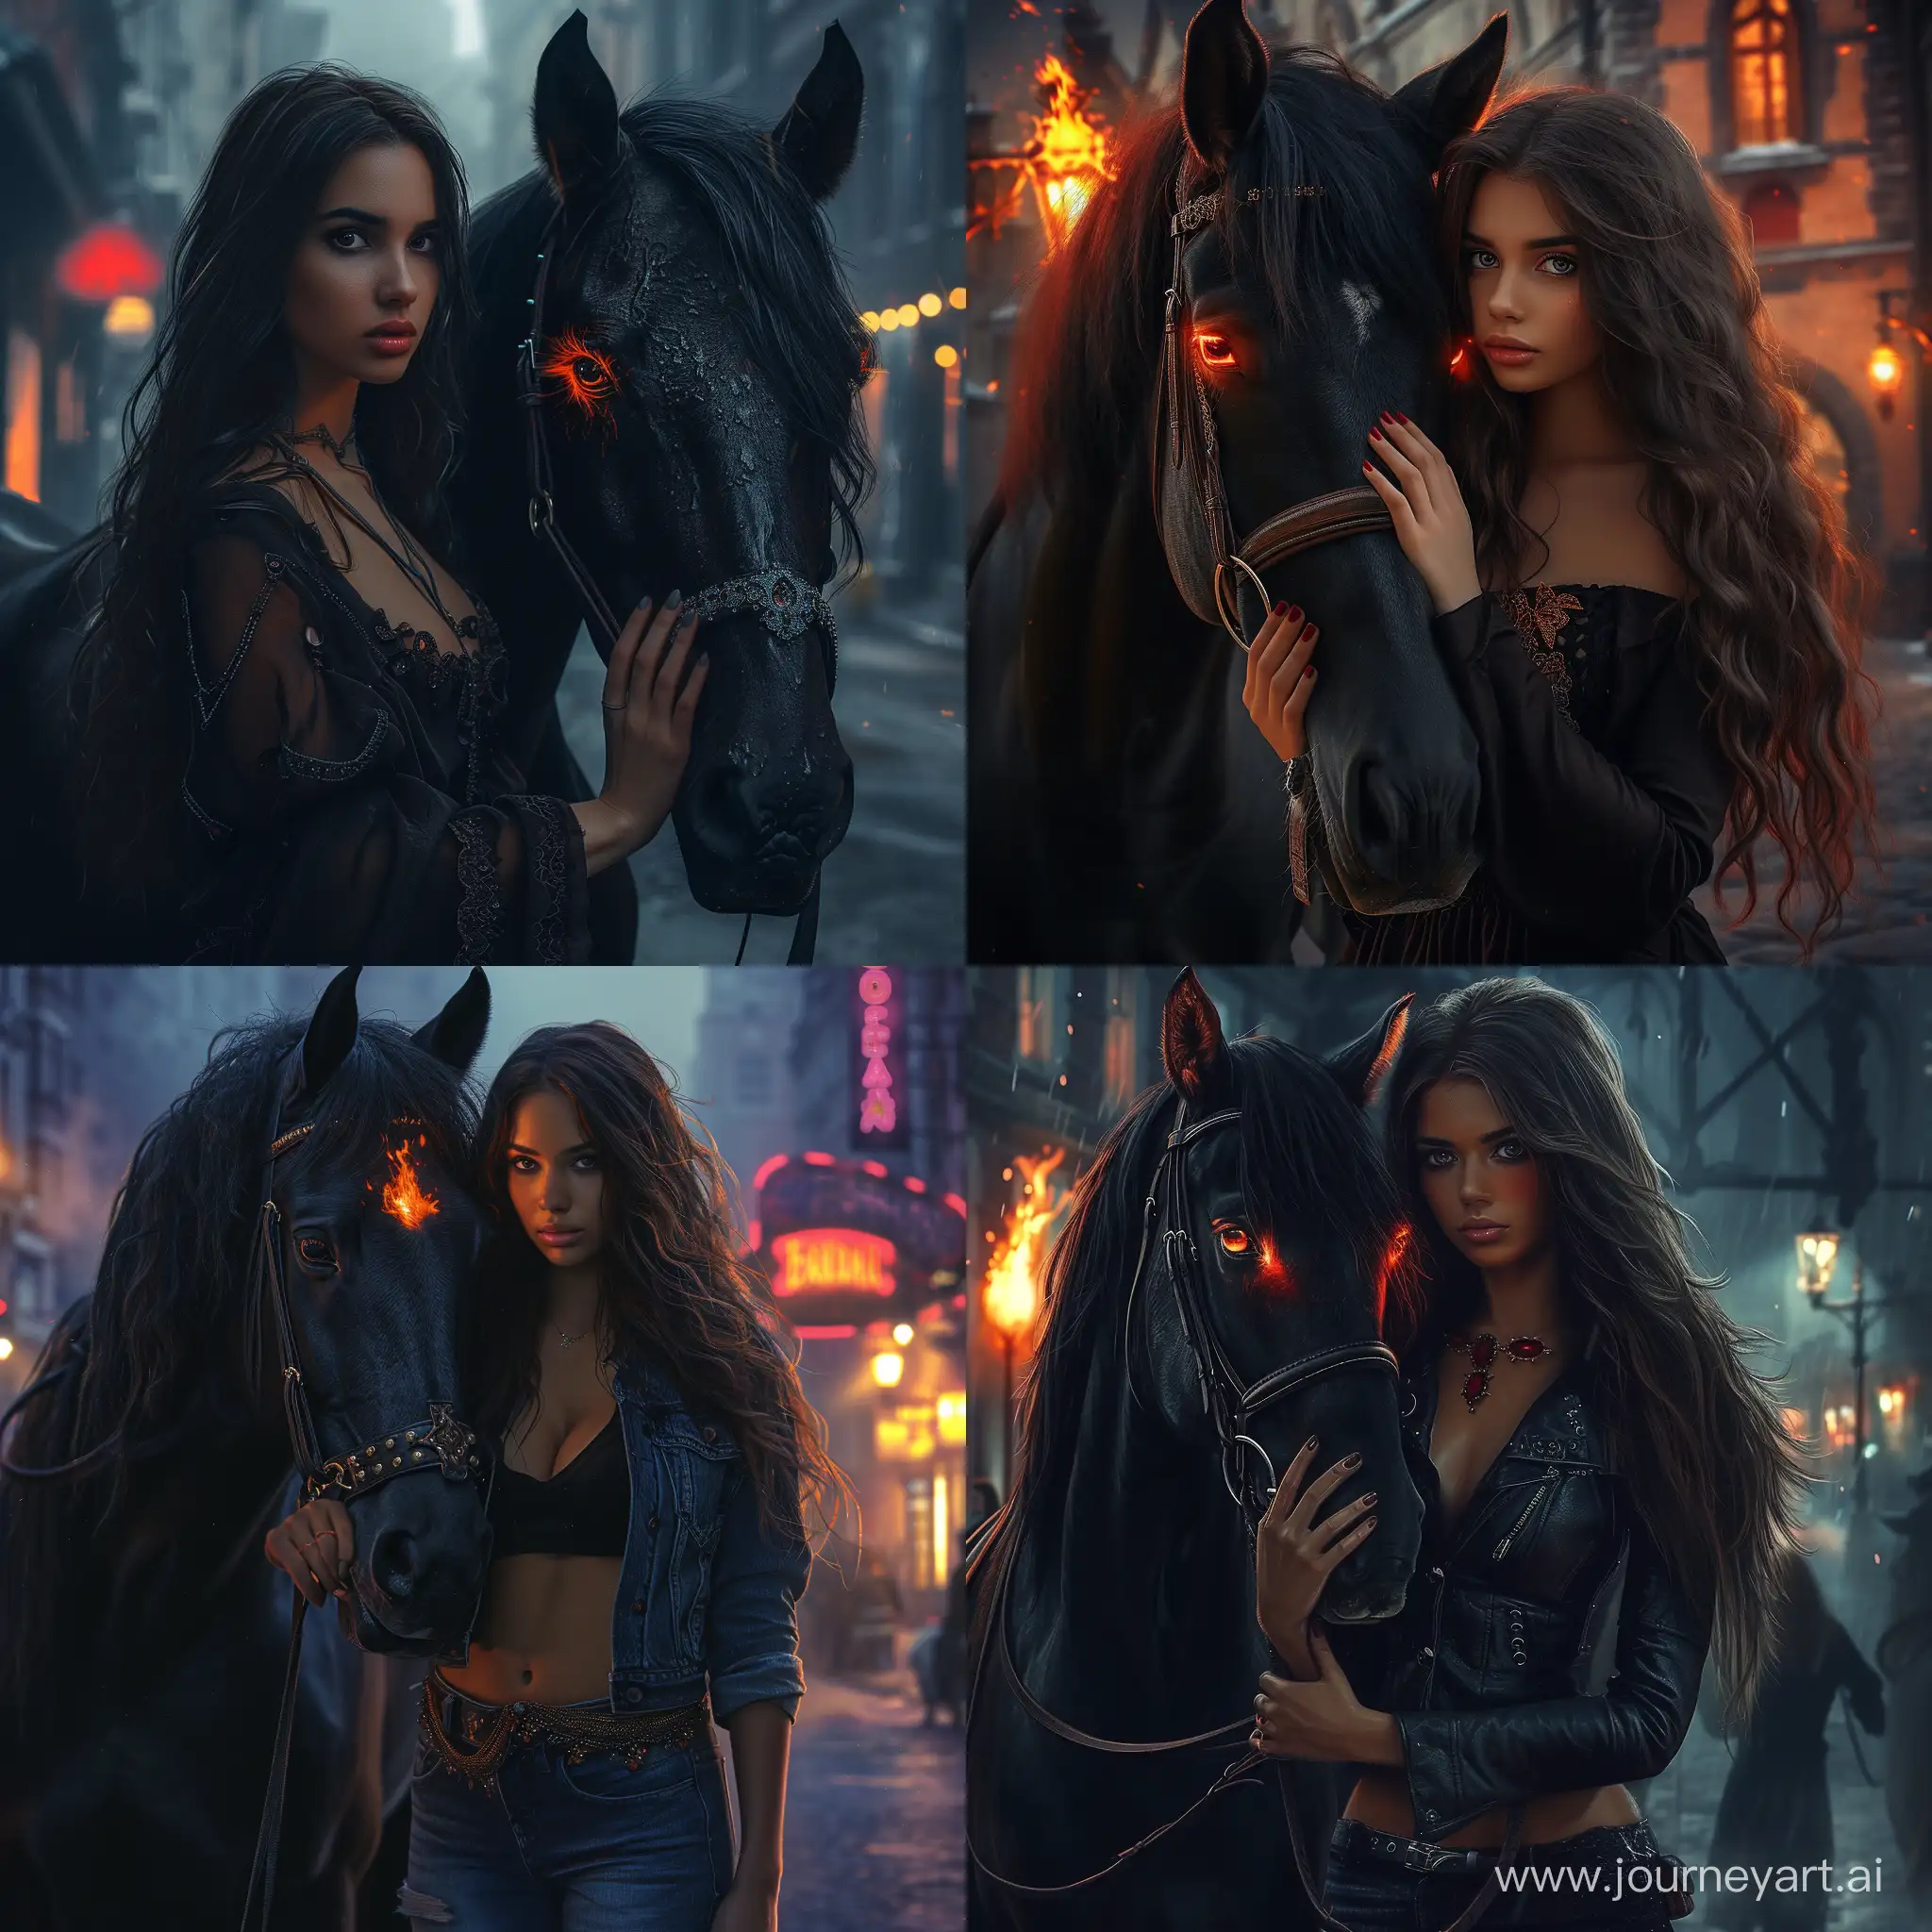 Enchanting-Night-with-a-Beautiful-Woman-and-Mysterious-Black-Horse